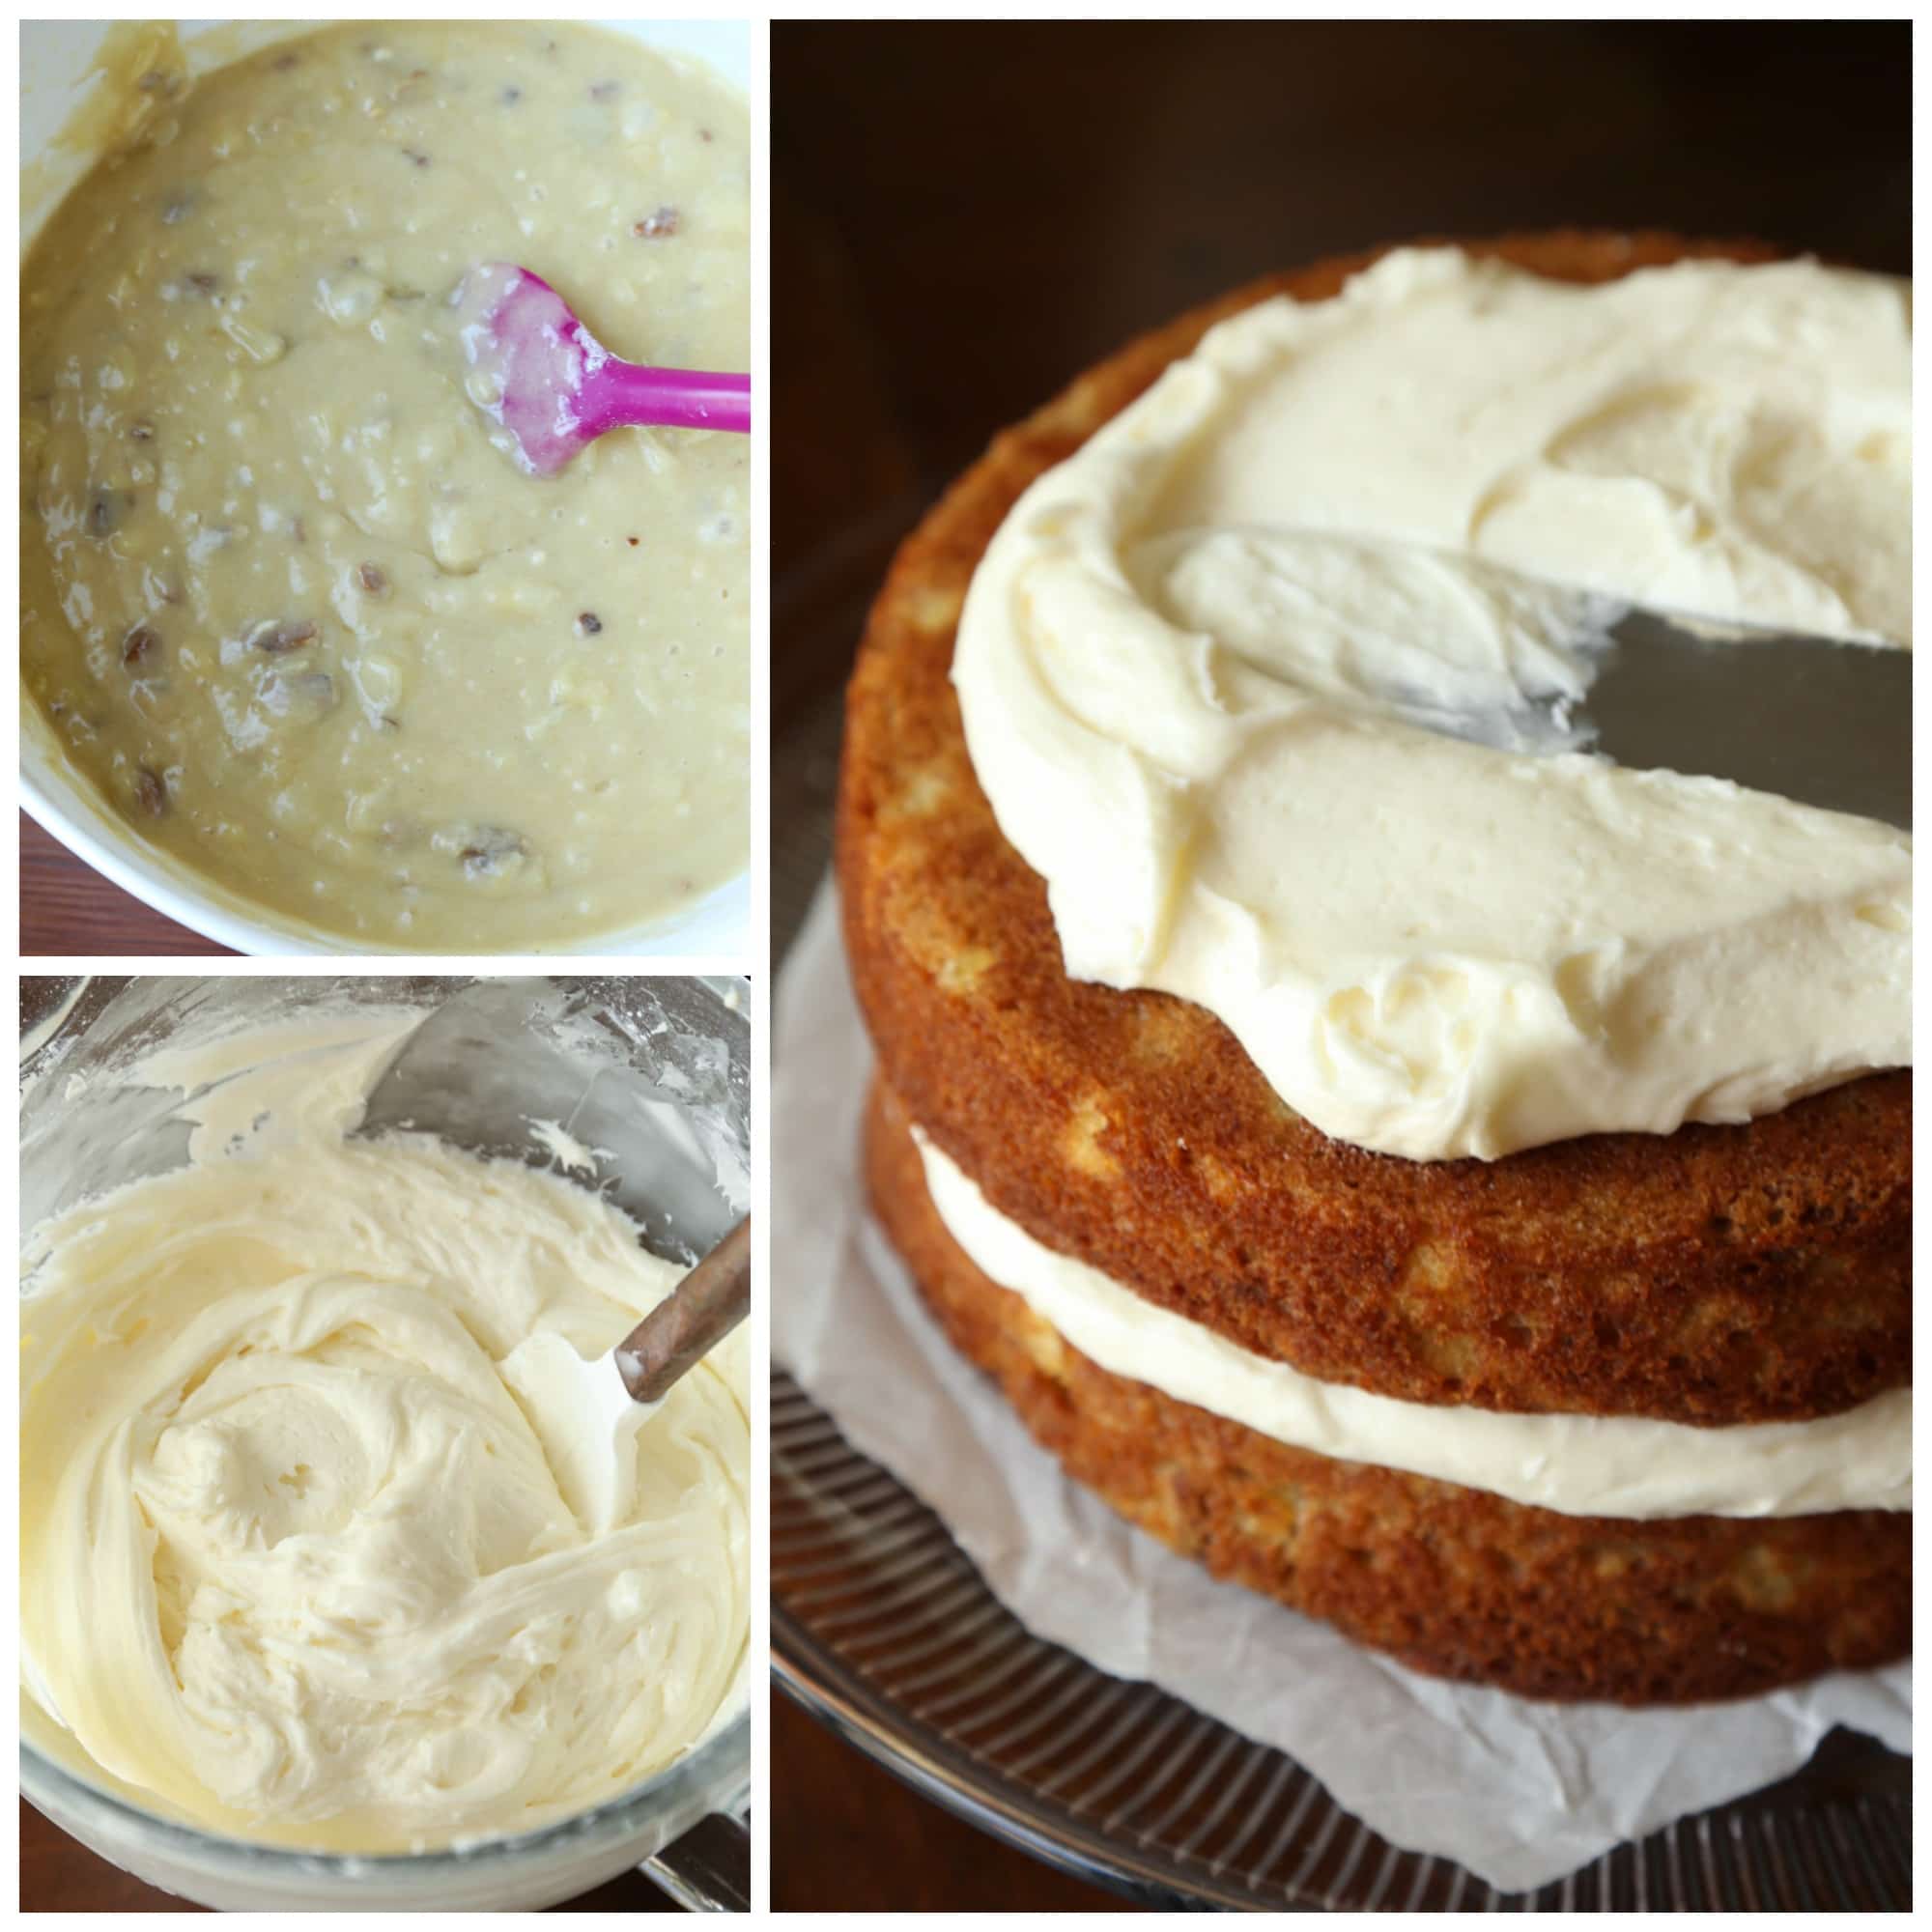 Photo collage showing how to make hummingbird cake: a photo of the batter, a photo of the frosting, and a photo of the cake being frosted.